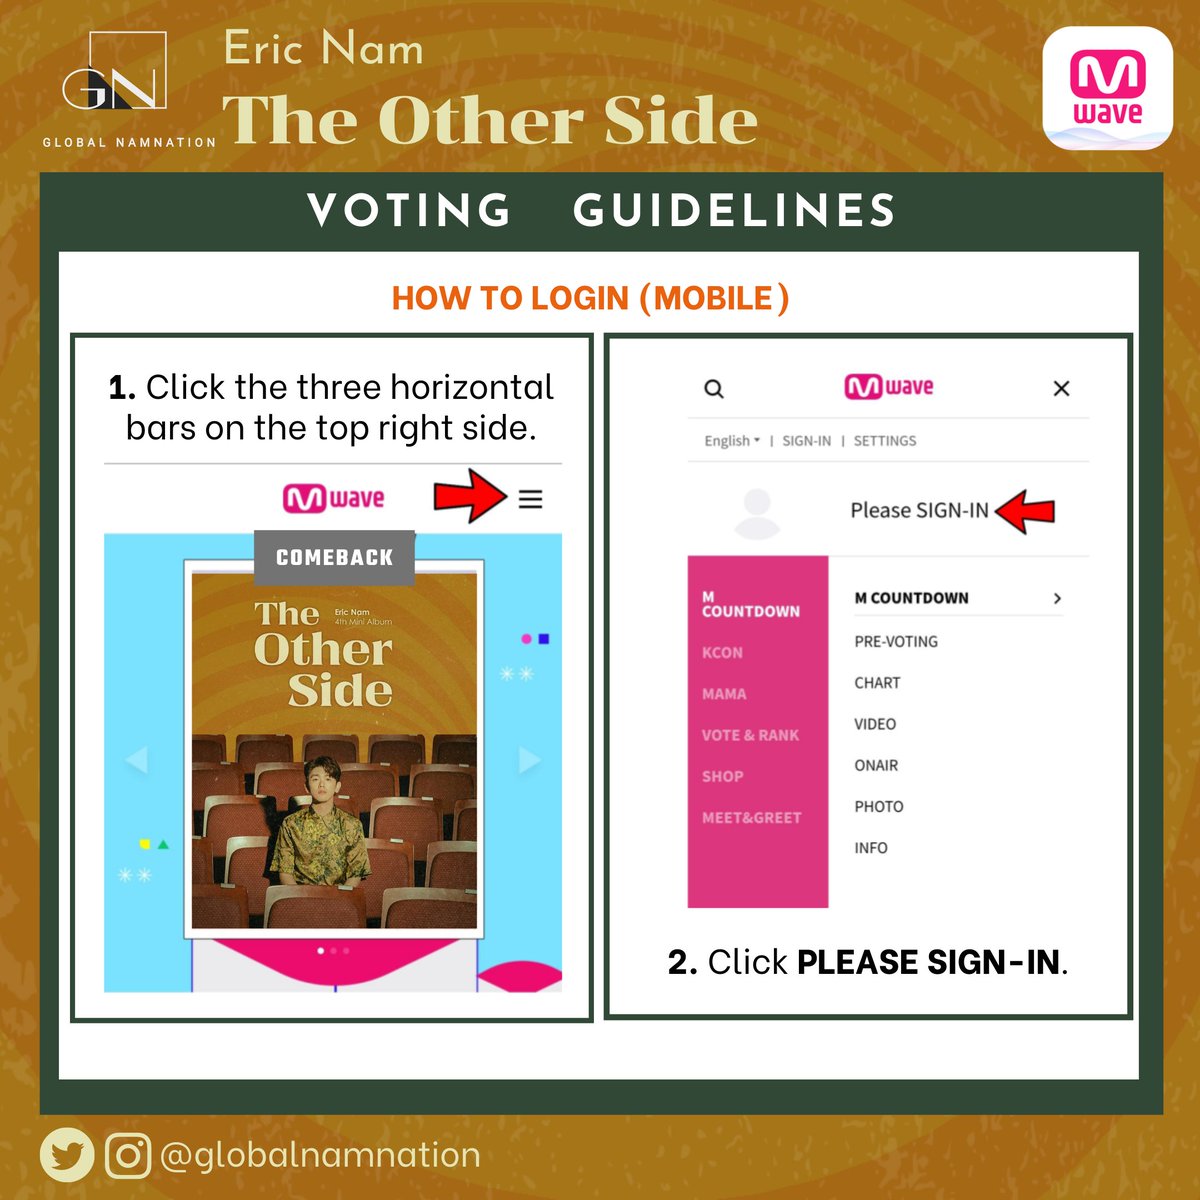 MWAVE   #VotingGuide (2/2)  #EricNamScheduleEric Nam's Activities for July 31, 2020.Don't forget to vote Eric Nam on MWAVE and WHOSFAN for MNet Countdown. Please see separate guidelines.  #EricNam  #에릭남  #TheOtherSide  #ParadiseWithEricNam